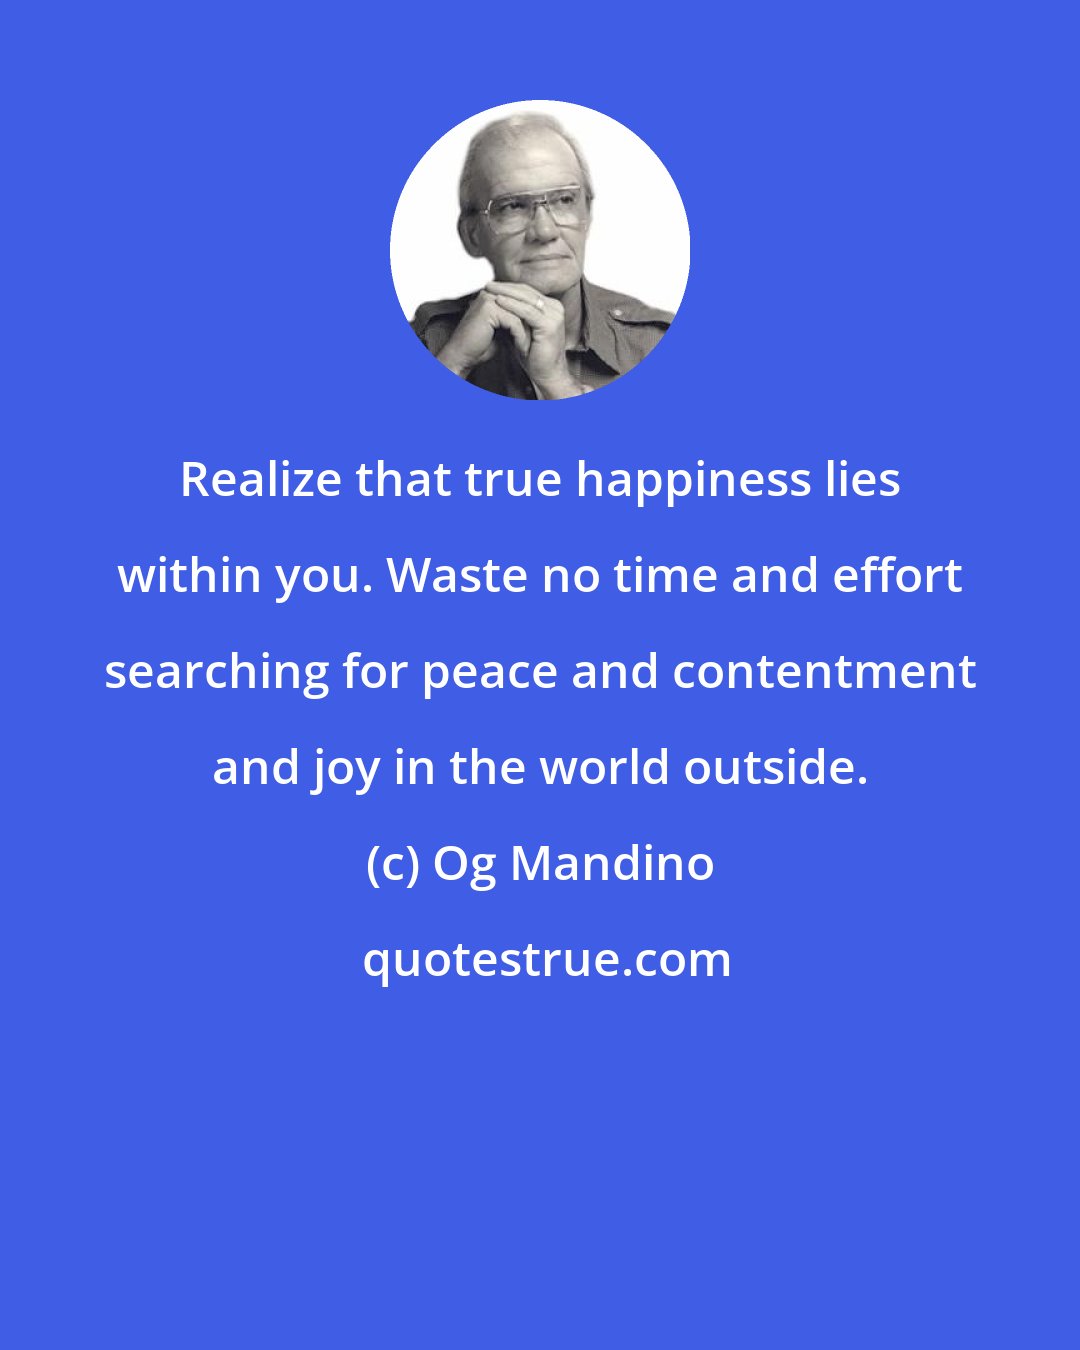 Og Mandino: Realize that true happiness lies within you. Waste no time and effort searching for peace and contentment and joy in the world outside.